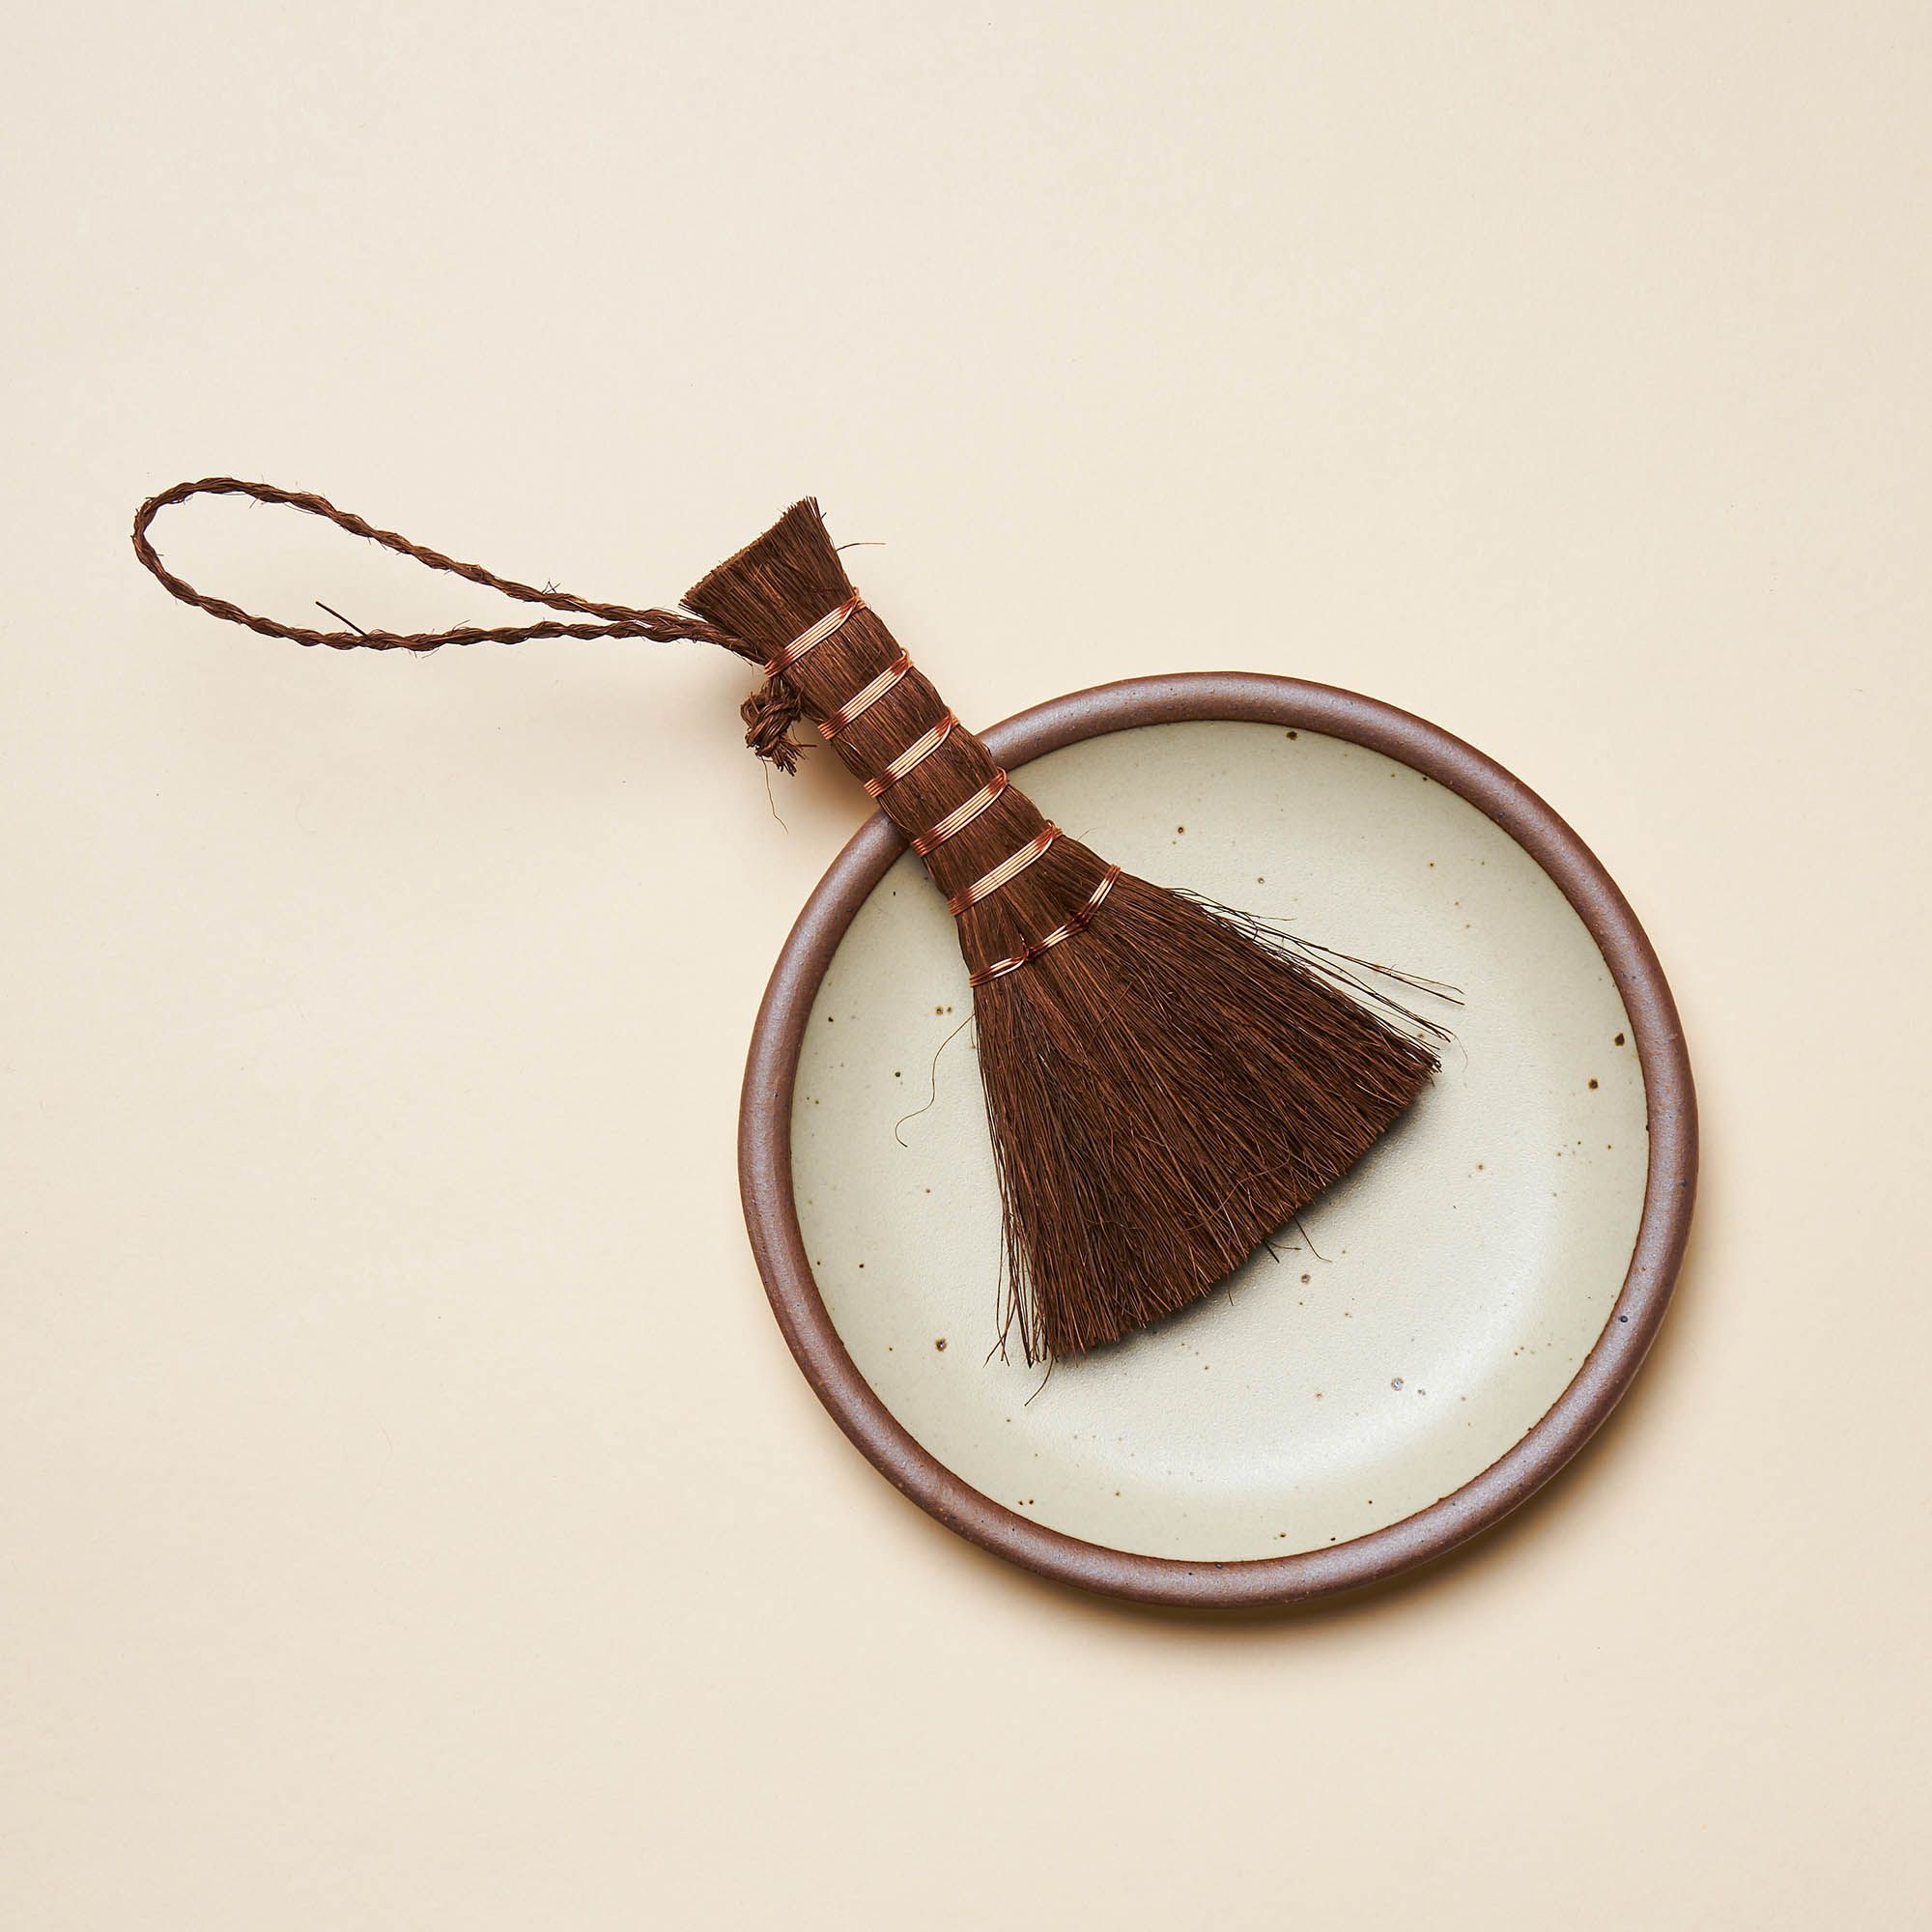 A small hand broom with a palm wooden handle